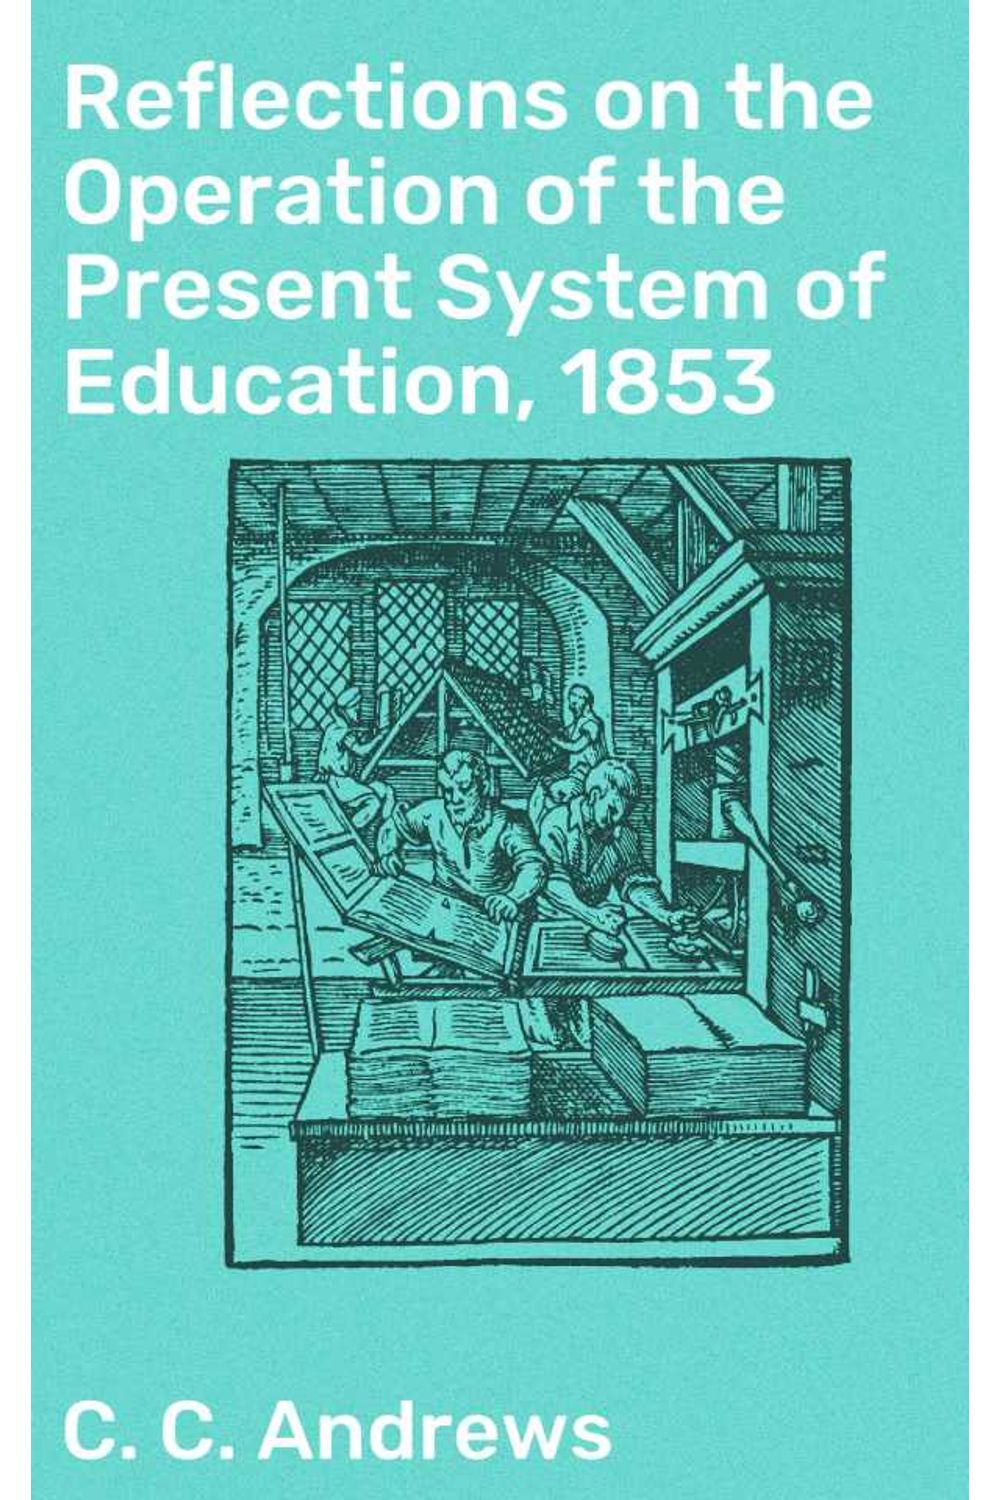 bw-reflections-on-the-operation-of-the-present-system-of-education-1853-good-press-4064066103415